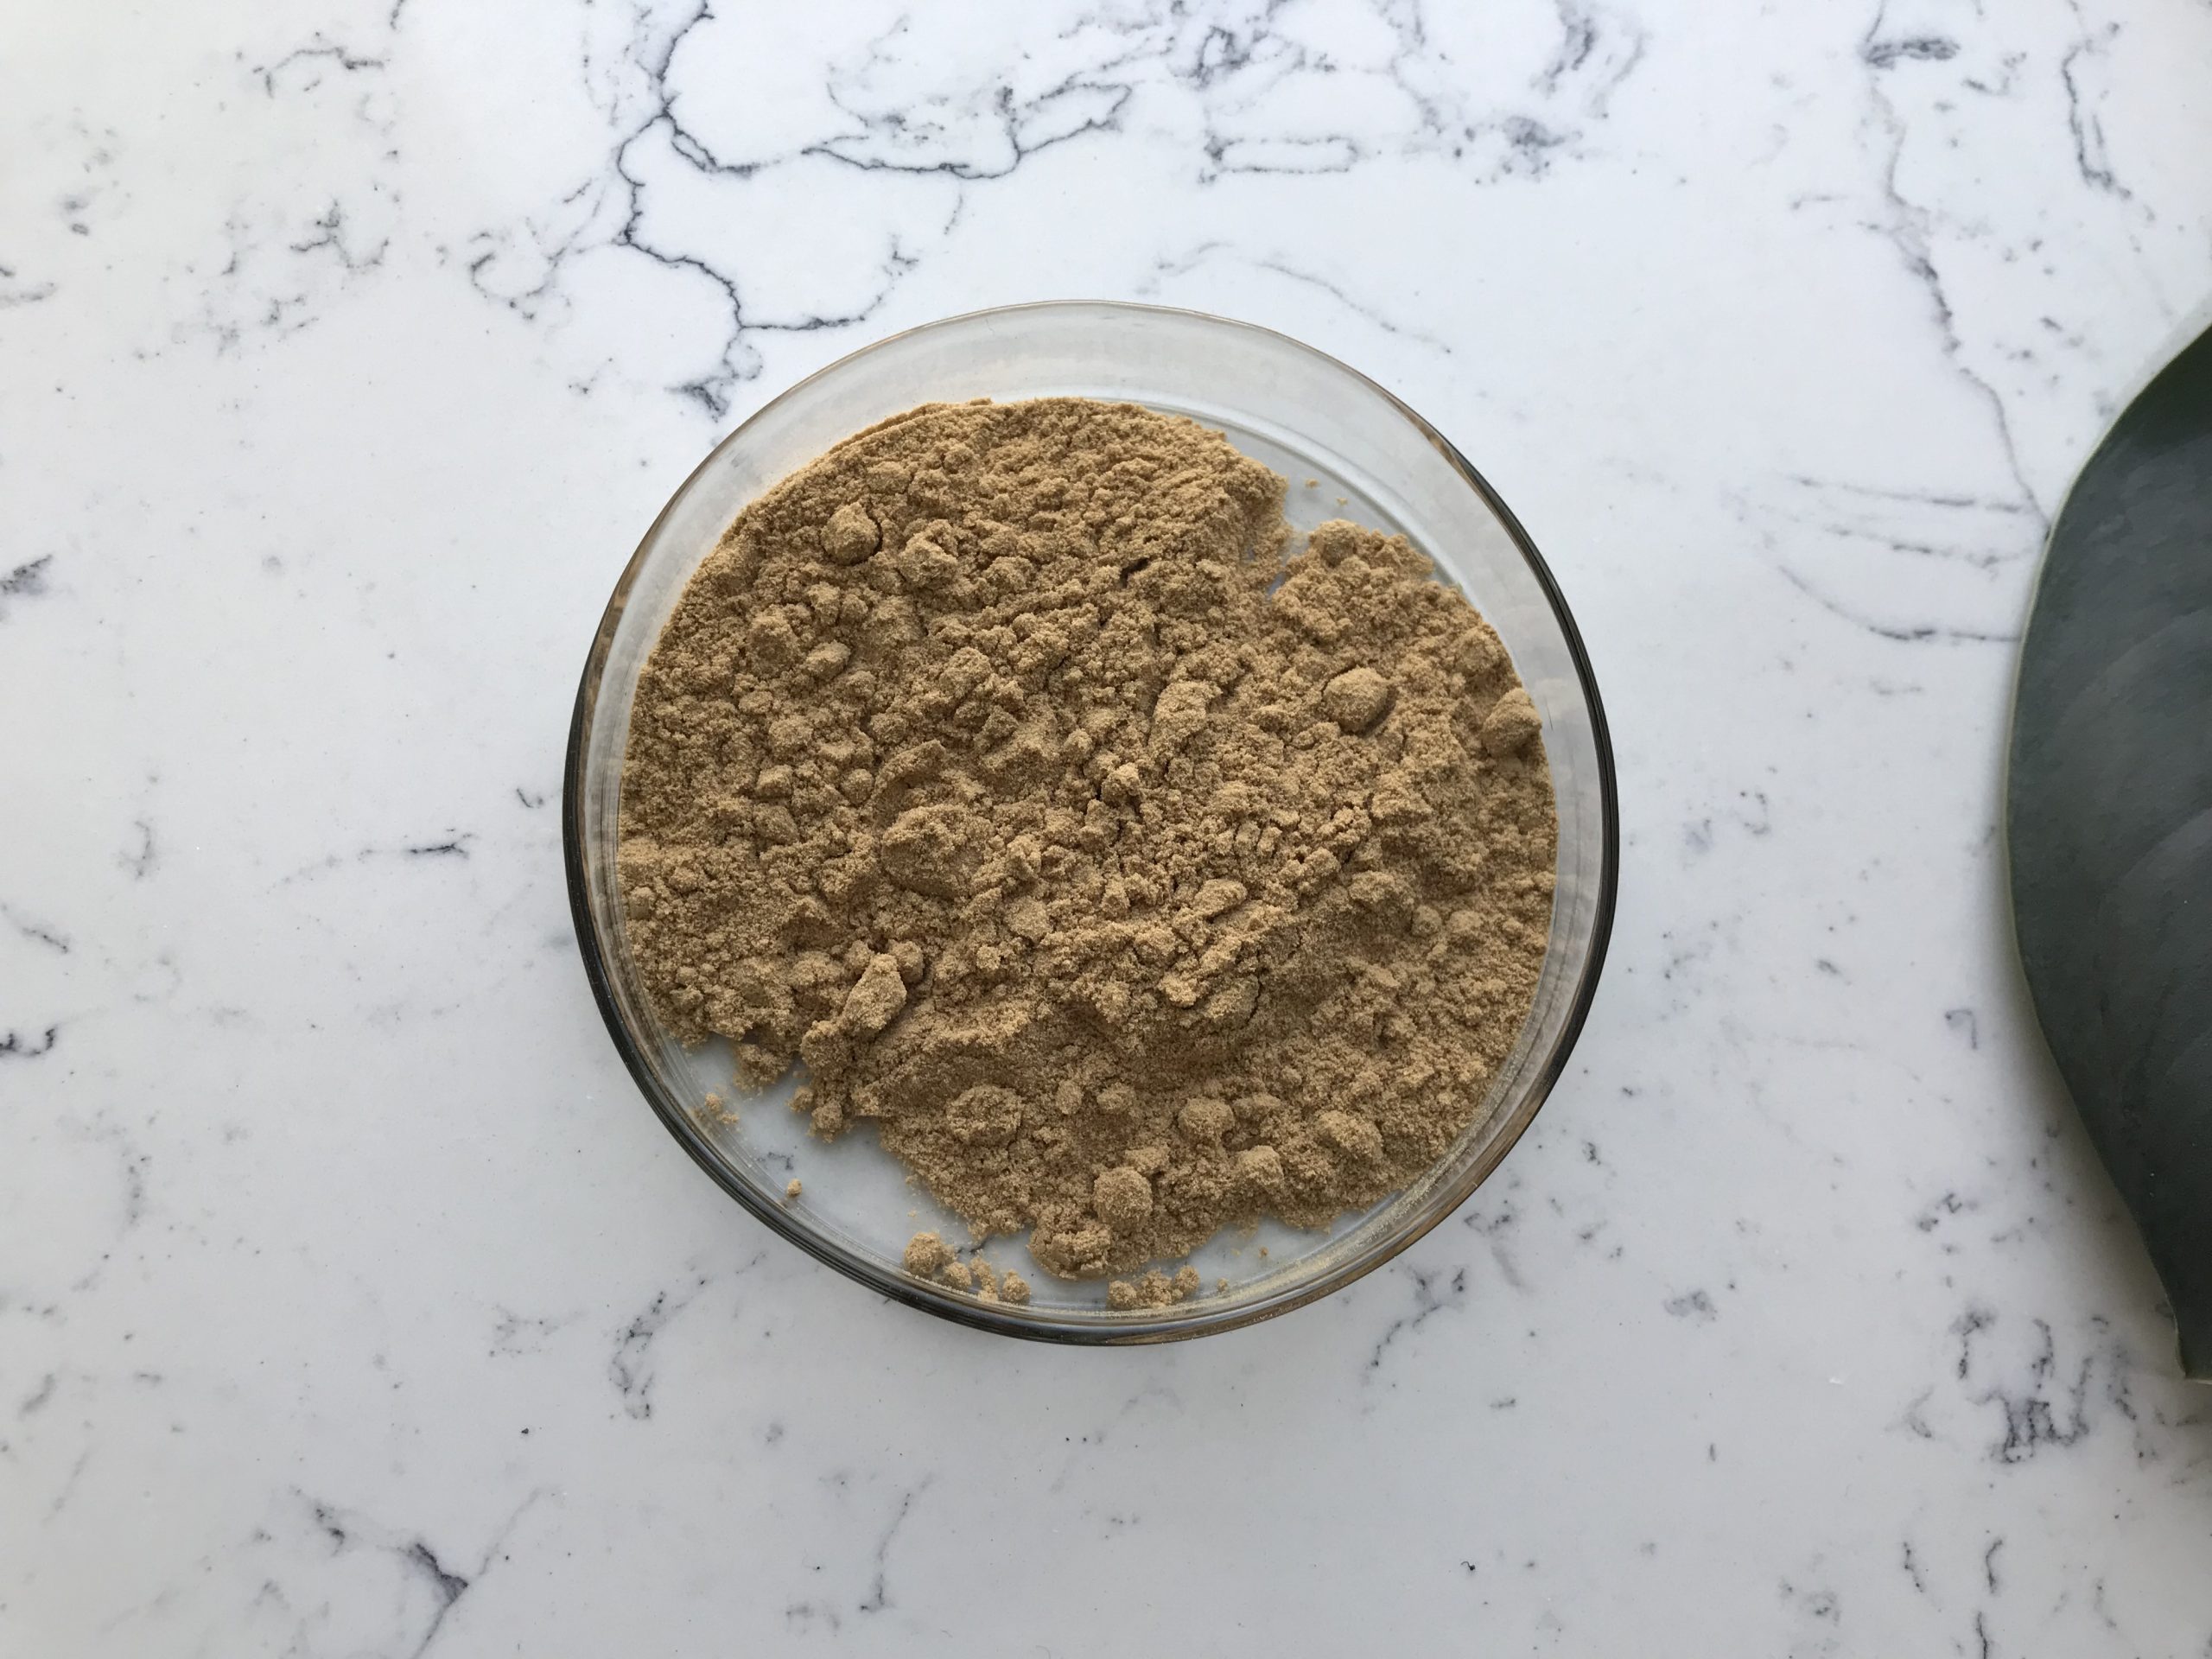 The application of Kava Extract-Xi'an Lyphar Biotech Co., Ltd